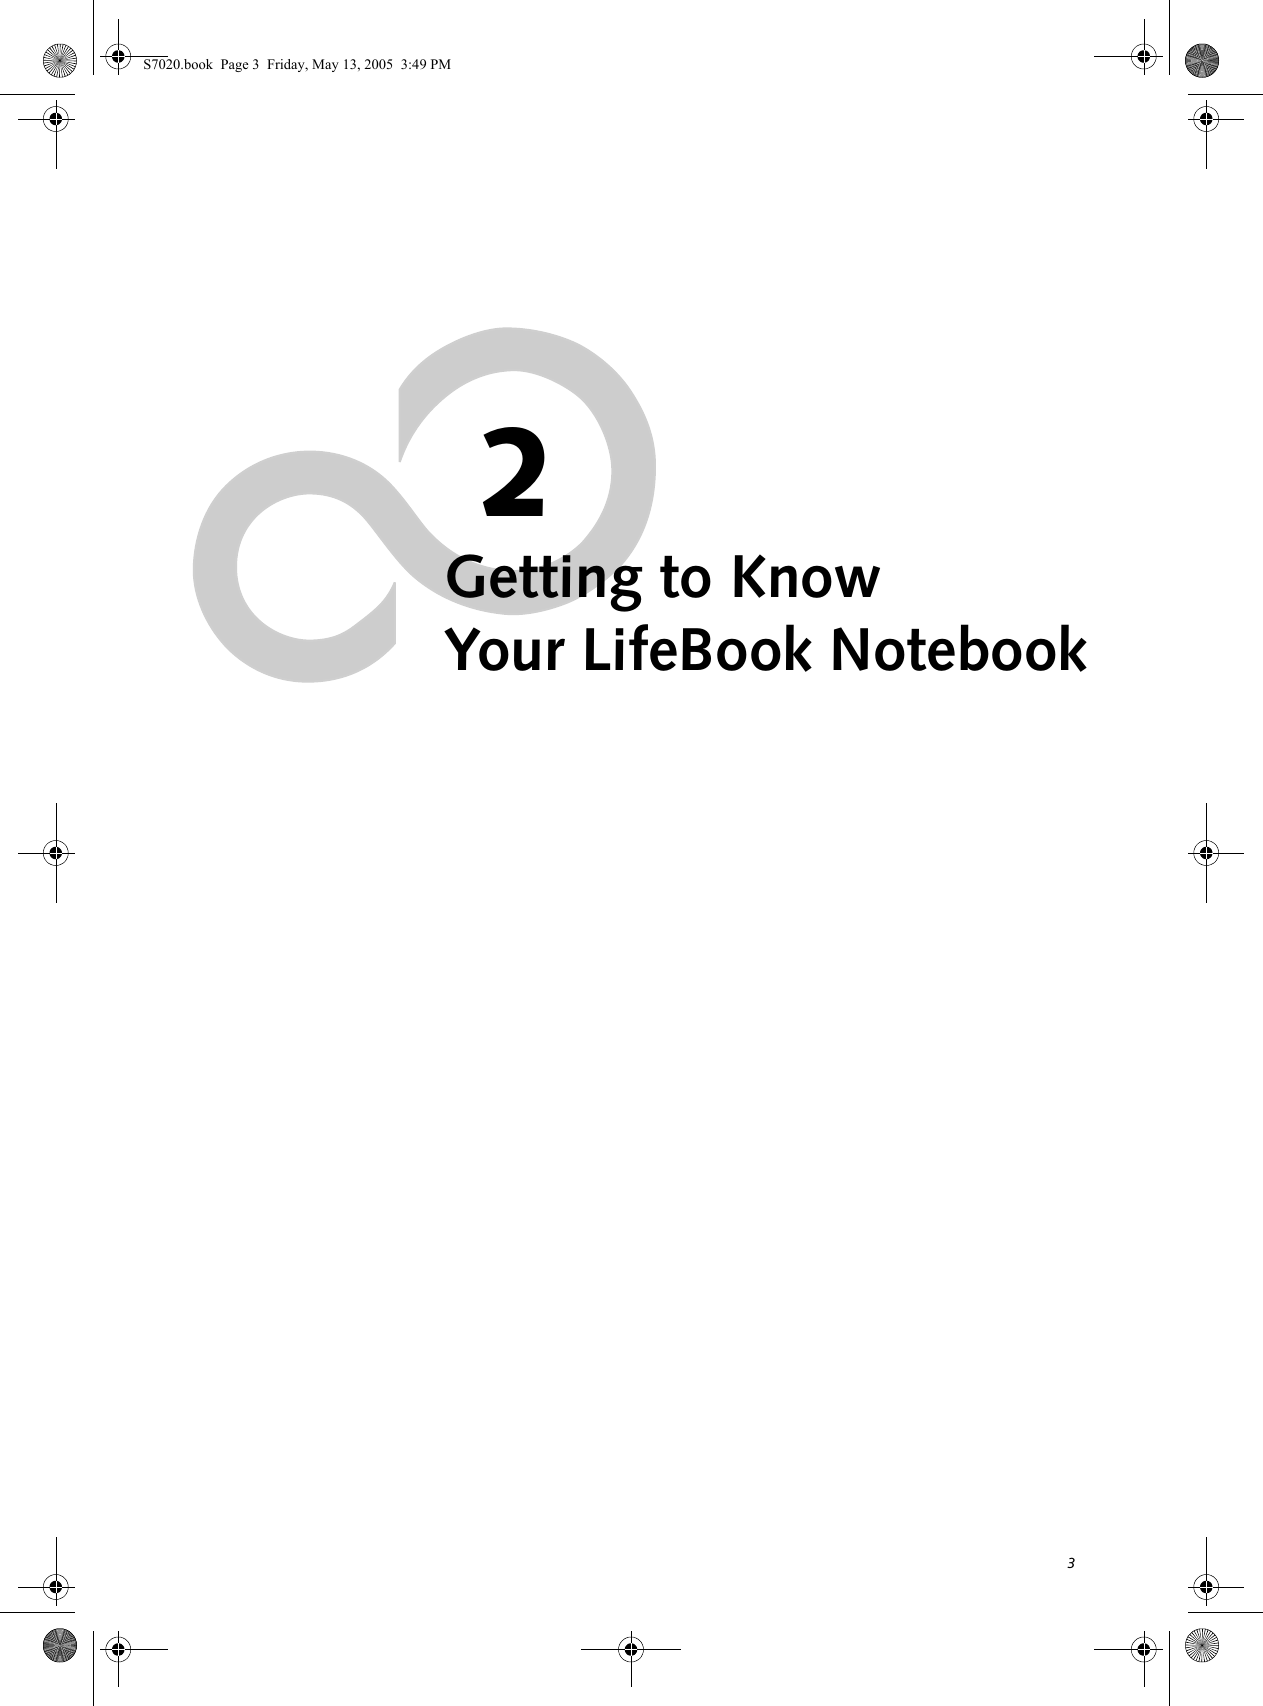 32Getting to KnowYour LifeBook NotebookS7020.book  Page 3  Friday, May 13, 2005  3:49 PM